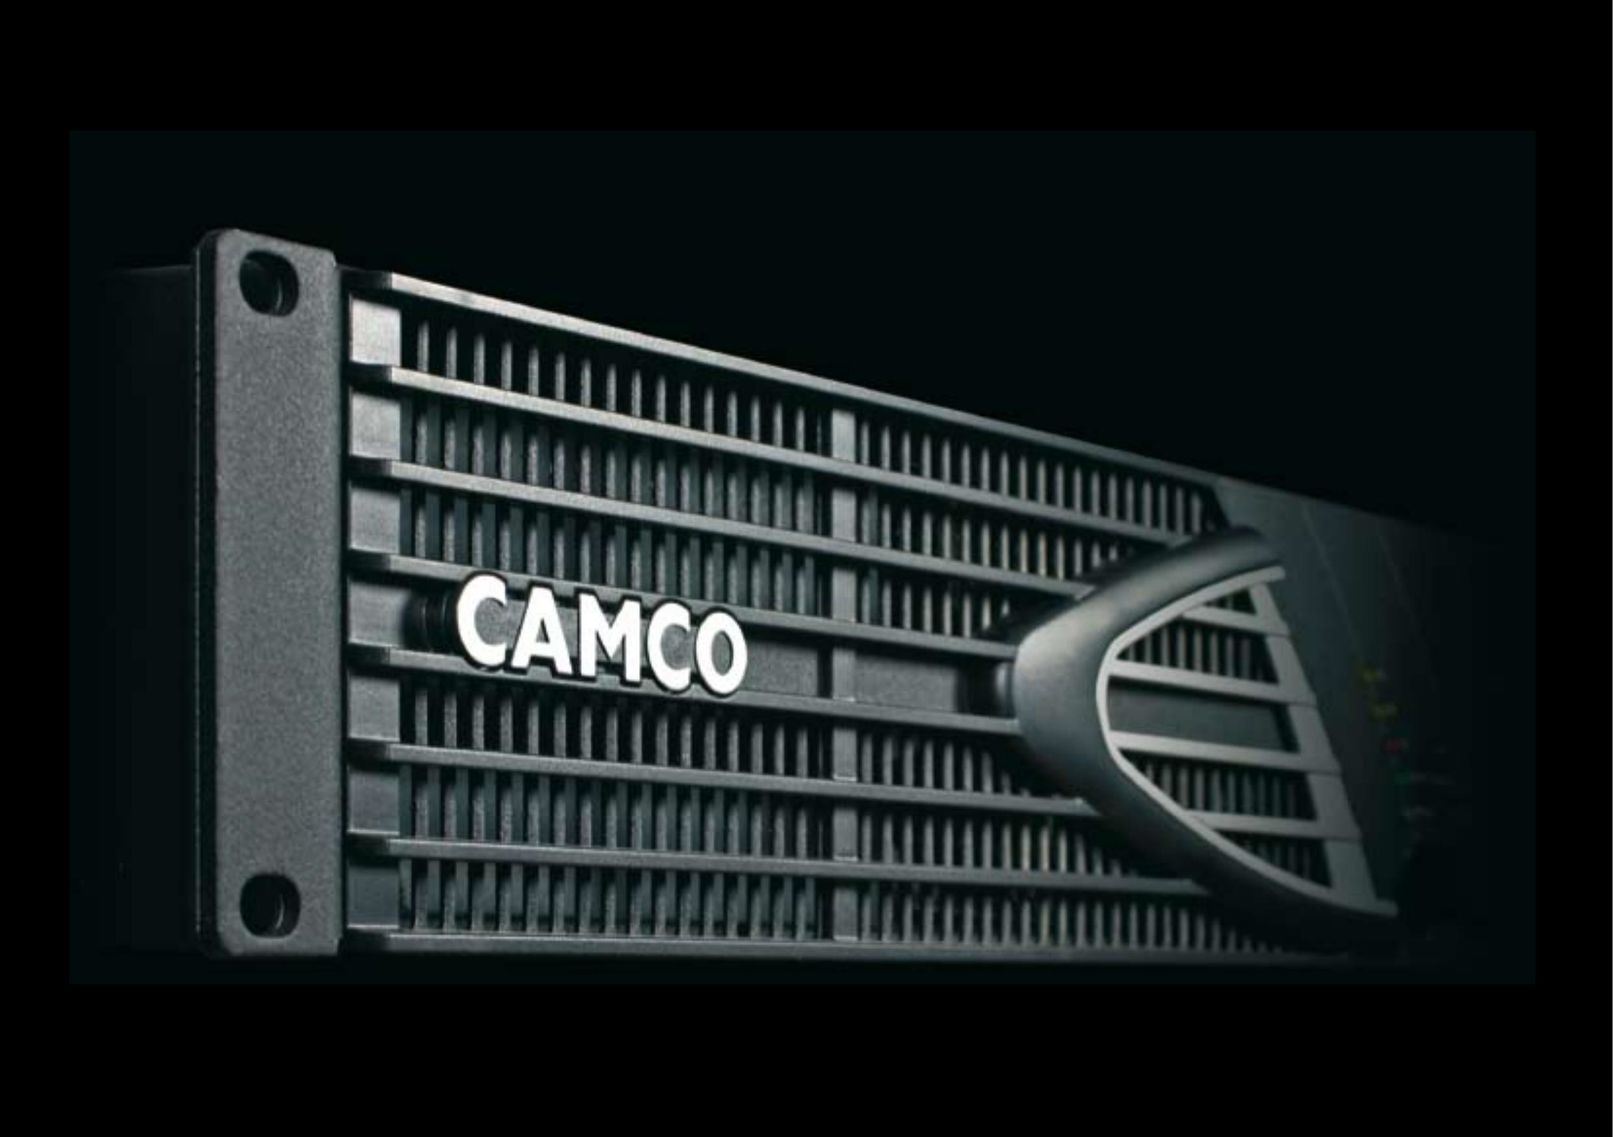 Camco P Series Stereo Amplifier User Manual